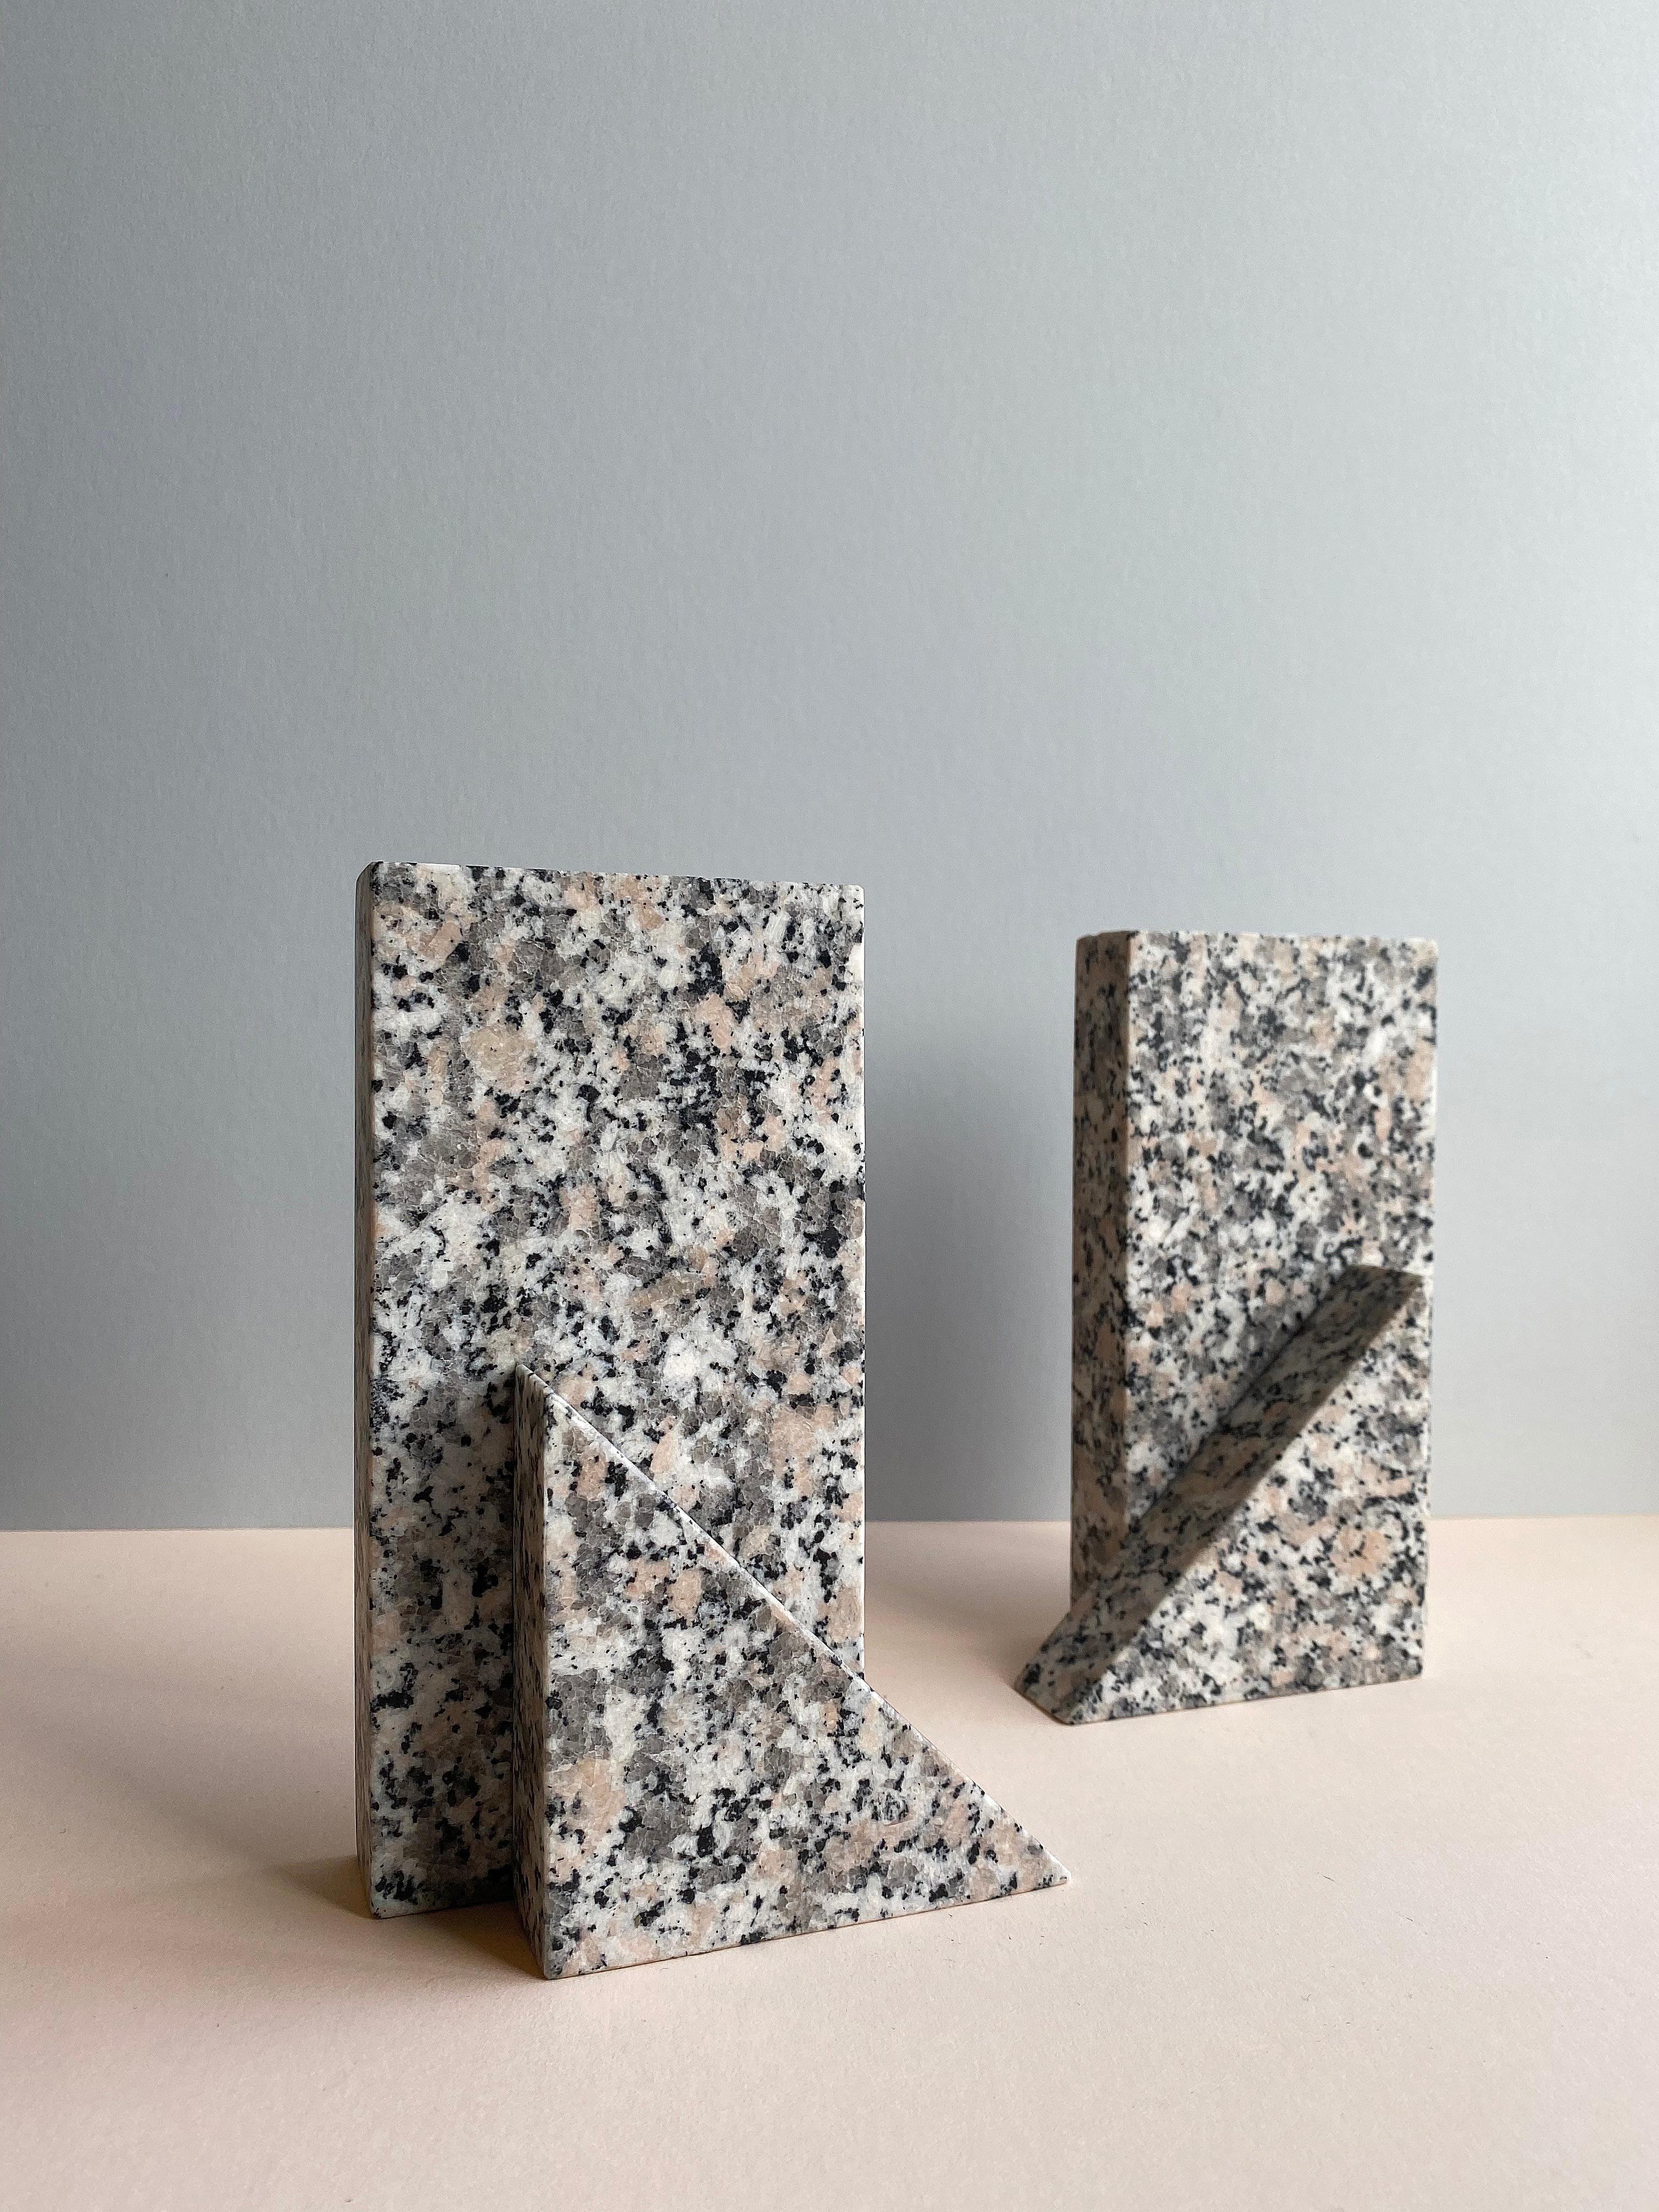 Materials matter set by Theodora Alfredsdottir
Unique set
Materials: Granite
Dimensions: 11 x 6 x 18 cm

Theodora Alfredsdottir is a product design studio based in London. 
Theodora is an Icelandic product designer. She holds a bachelor’s